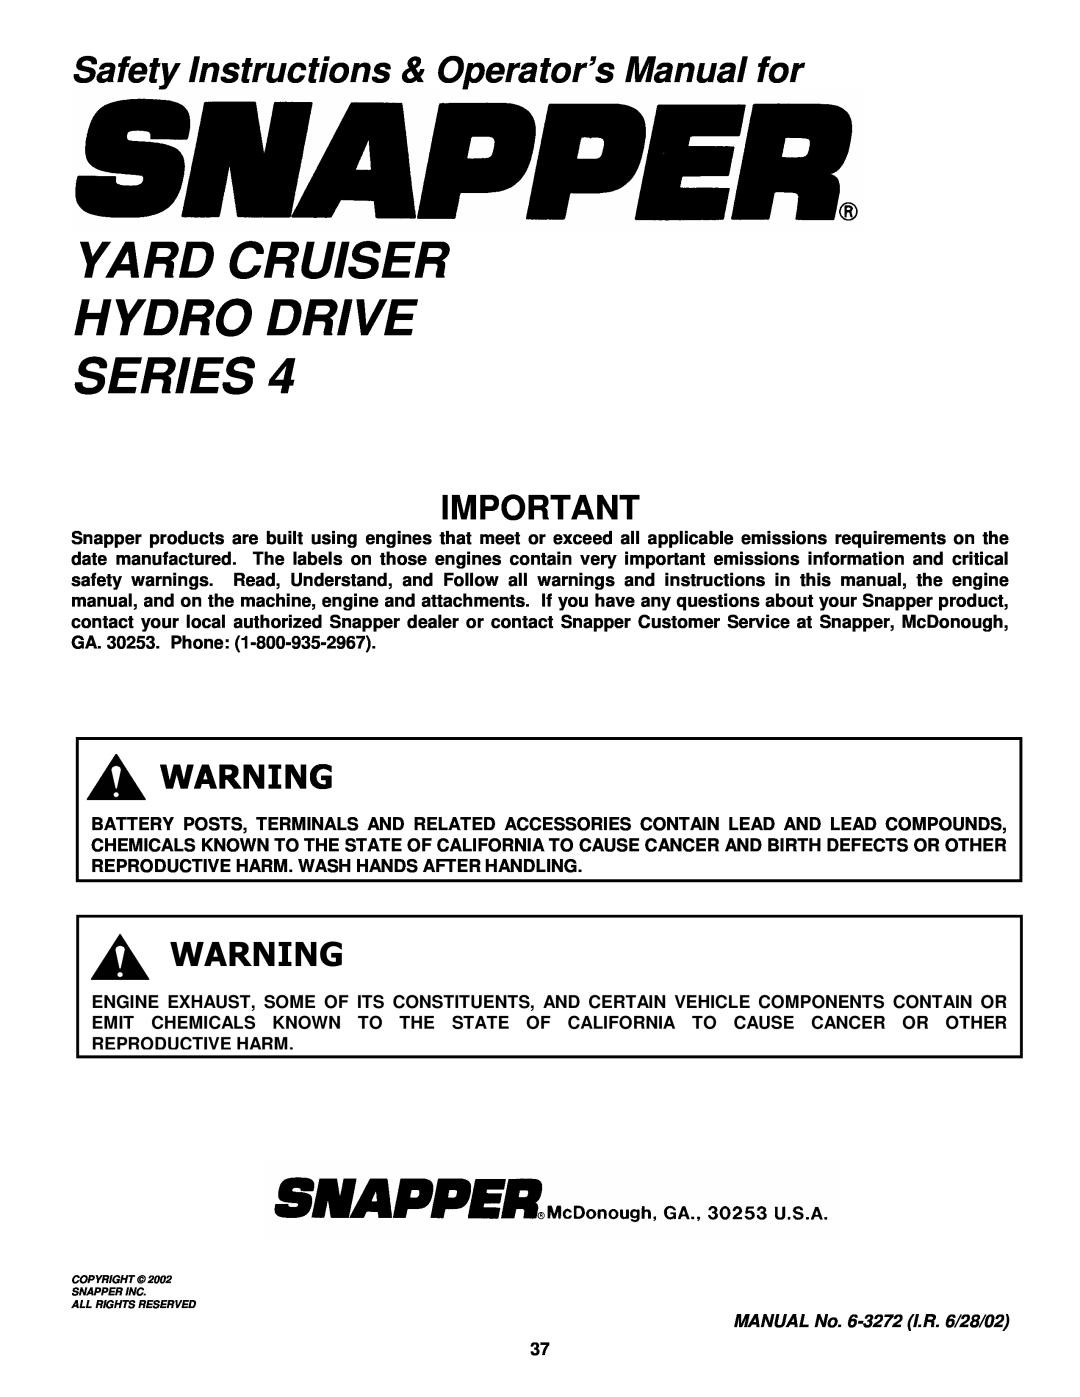 Snapper YZ15334BVE, YZ15384BVE Yard Cruiser Hydro Drive Series, Safety Instructions & Operator’s Manual for 